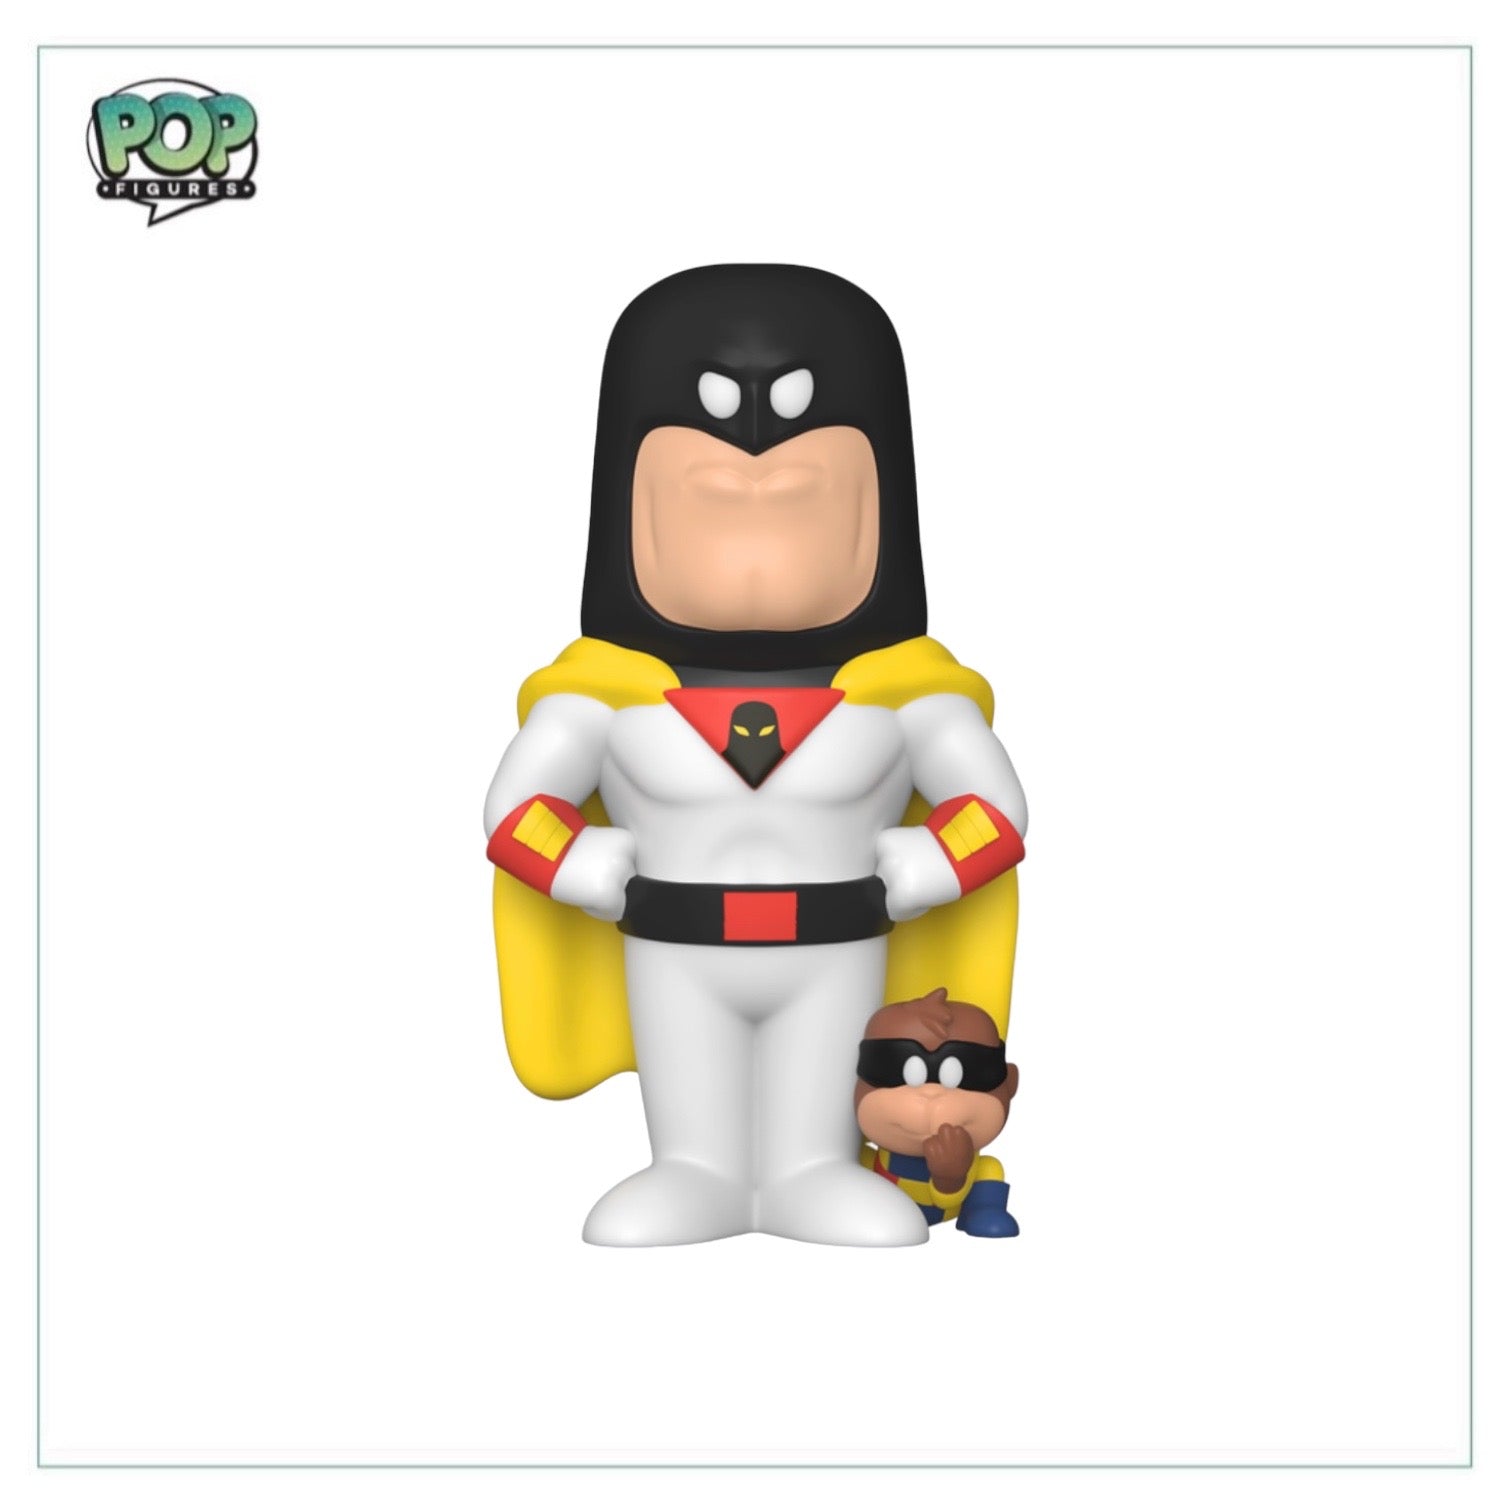 Space Ghost Funko Soda Vinyl Figure - Space Ghost - Fun on the Run Online Exclusive LE35000 Pcs - Chance of Chase